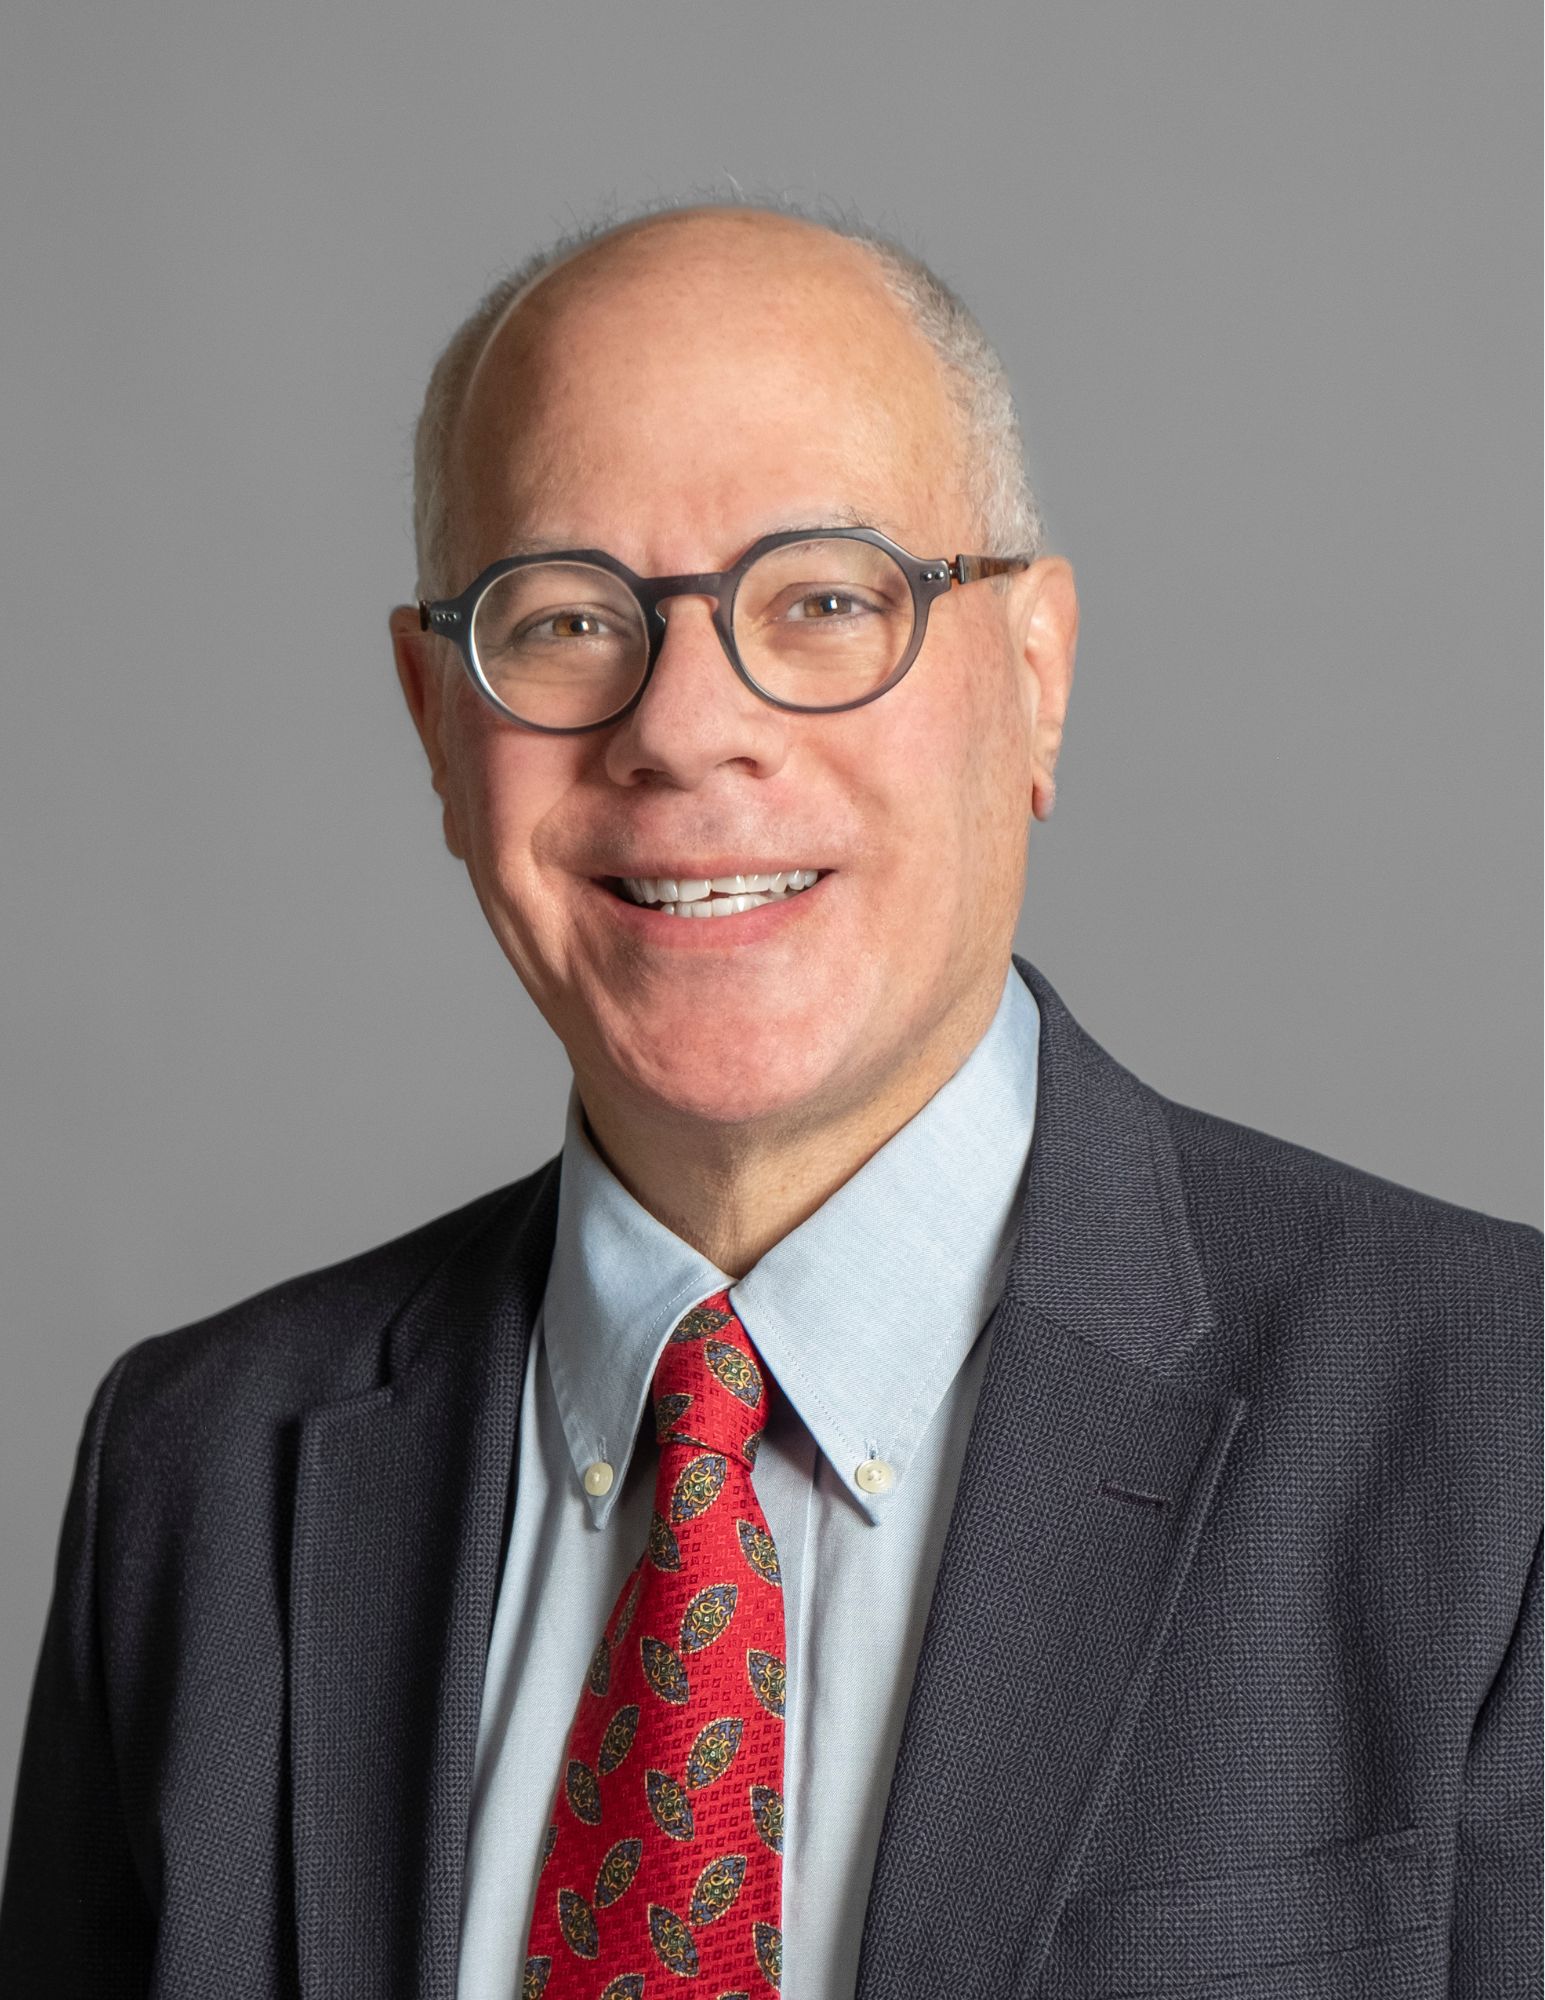 This image shows a man with short, gray hair wearing round glasses, a dark gray suit jacket, a blue dress shirt, and a red patterned tie. He is smiling and is posing against a plain gray background.